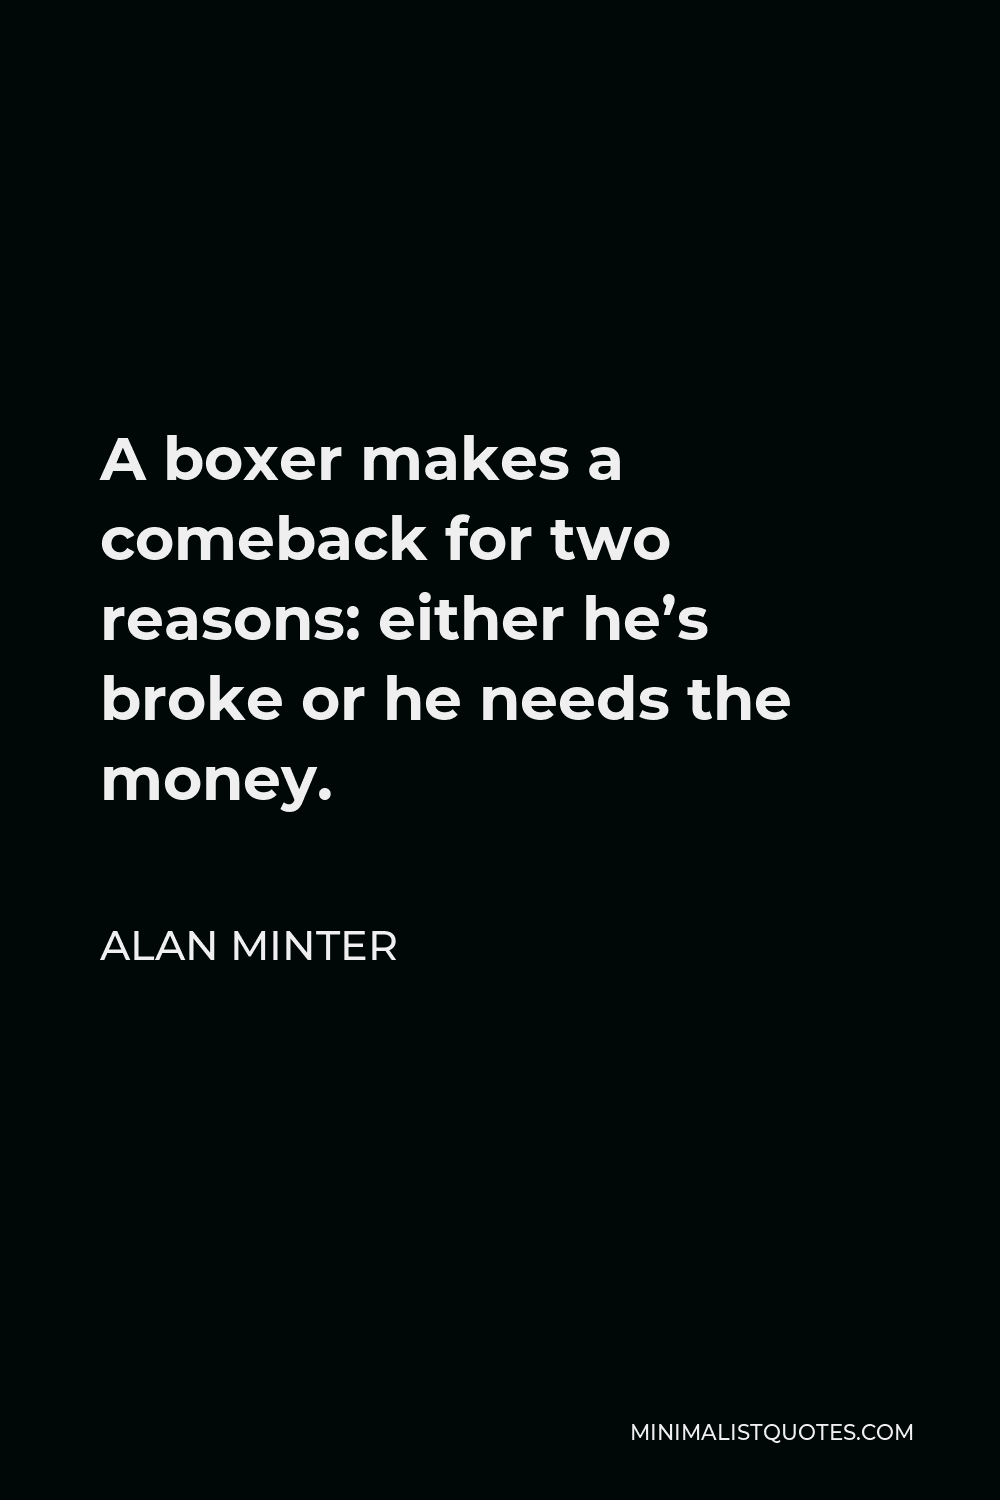 Alan Minter Quote - A boxer makes a comeback for two reasons: either he’s broke or he needs the money.